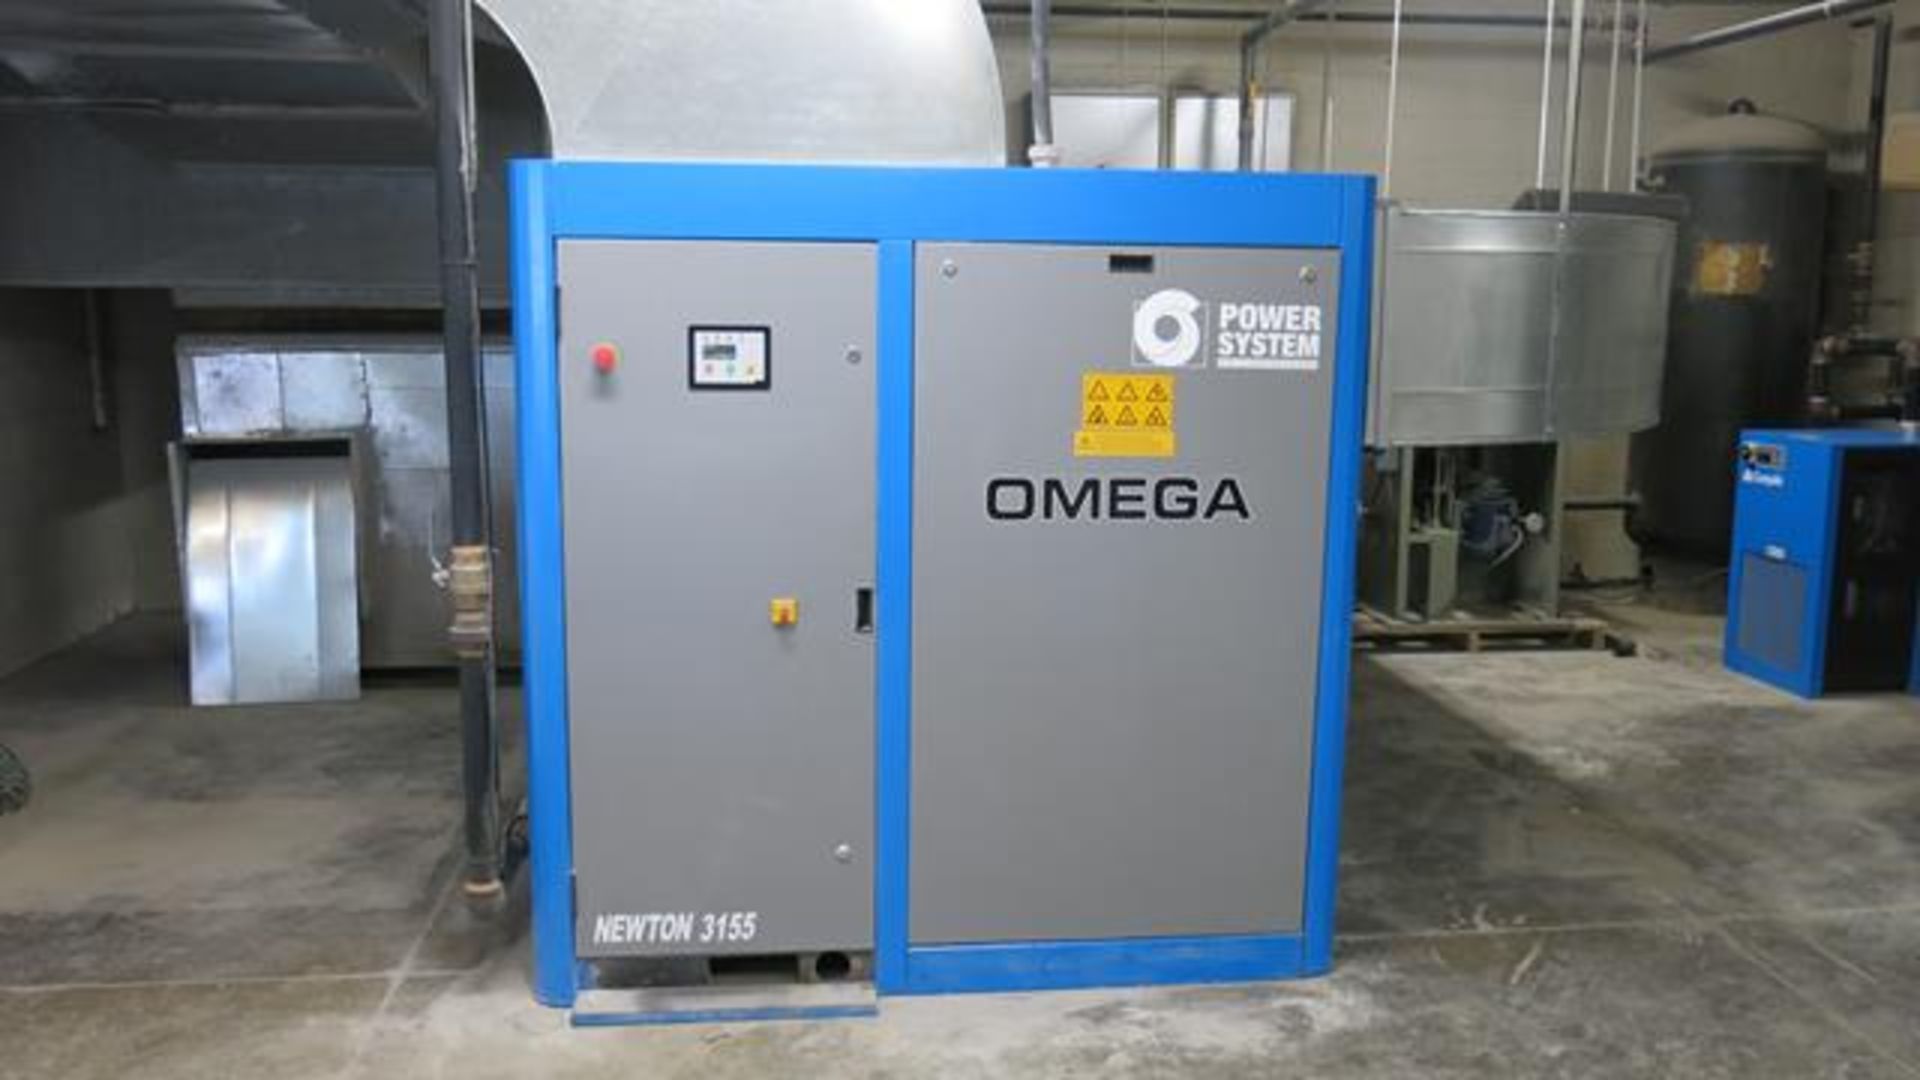 OMEGA POWER SYSTEMS, PS-3155-8-05, NEWTON 3155, 75 HP, AIR COMPRESSOR, 116 PSI, S/N 3712690001,